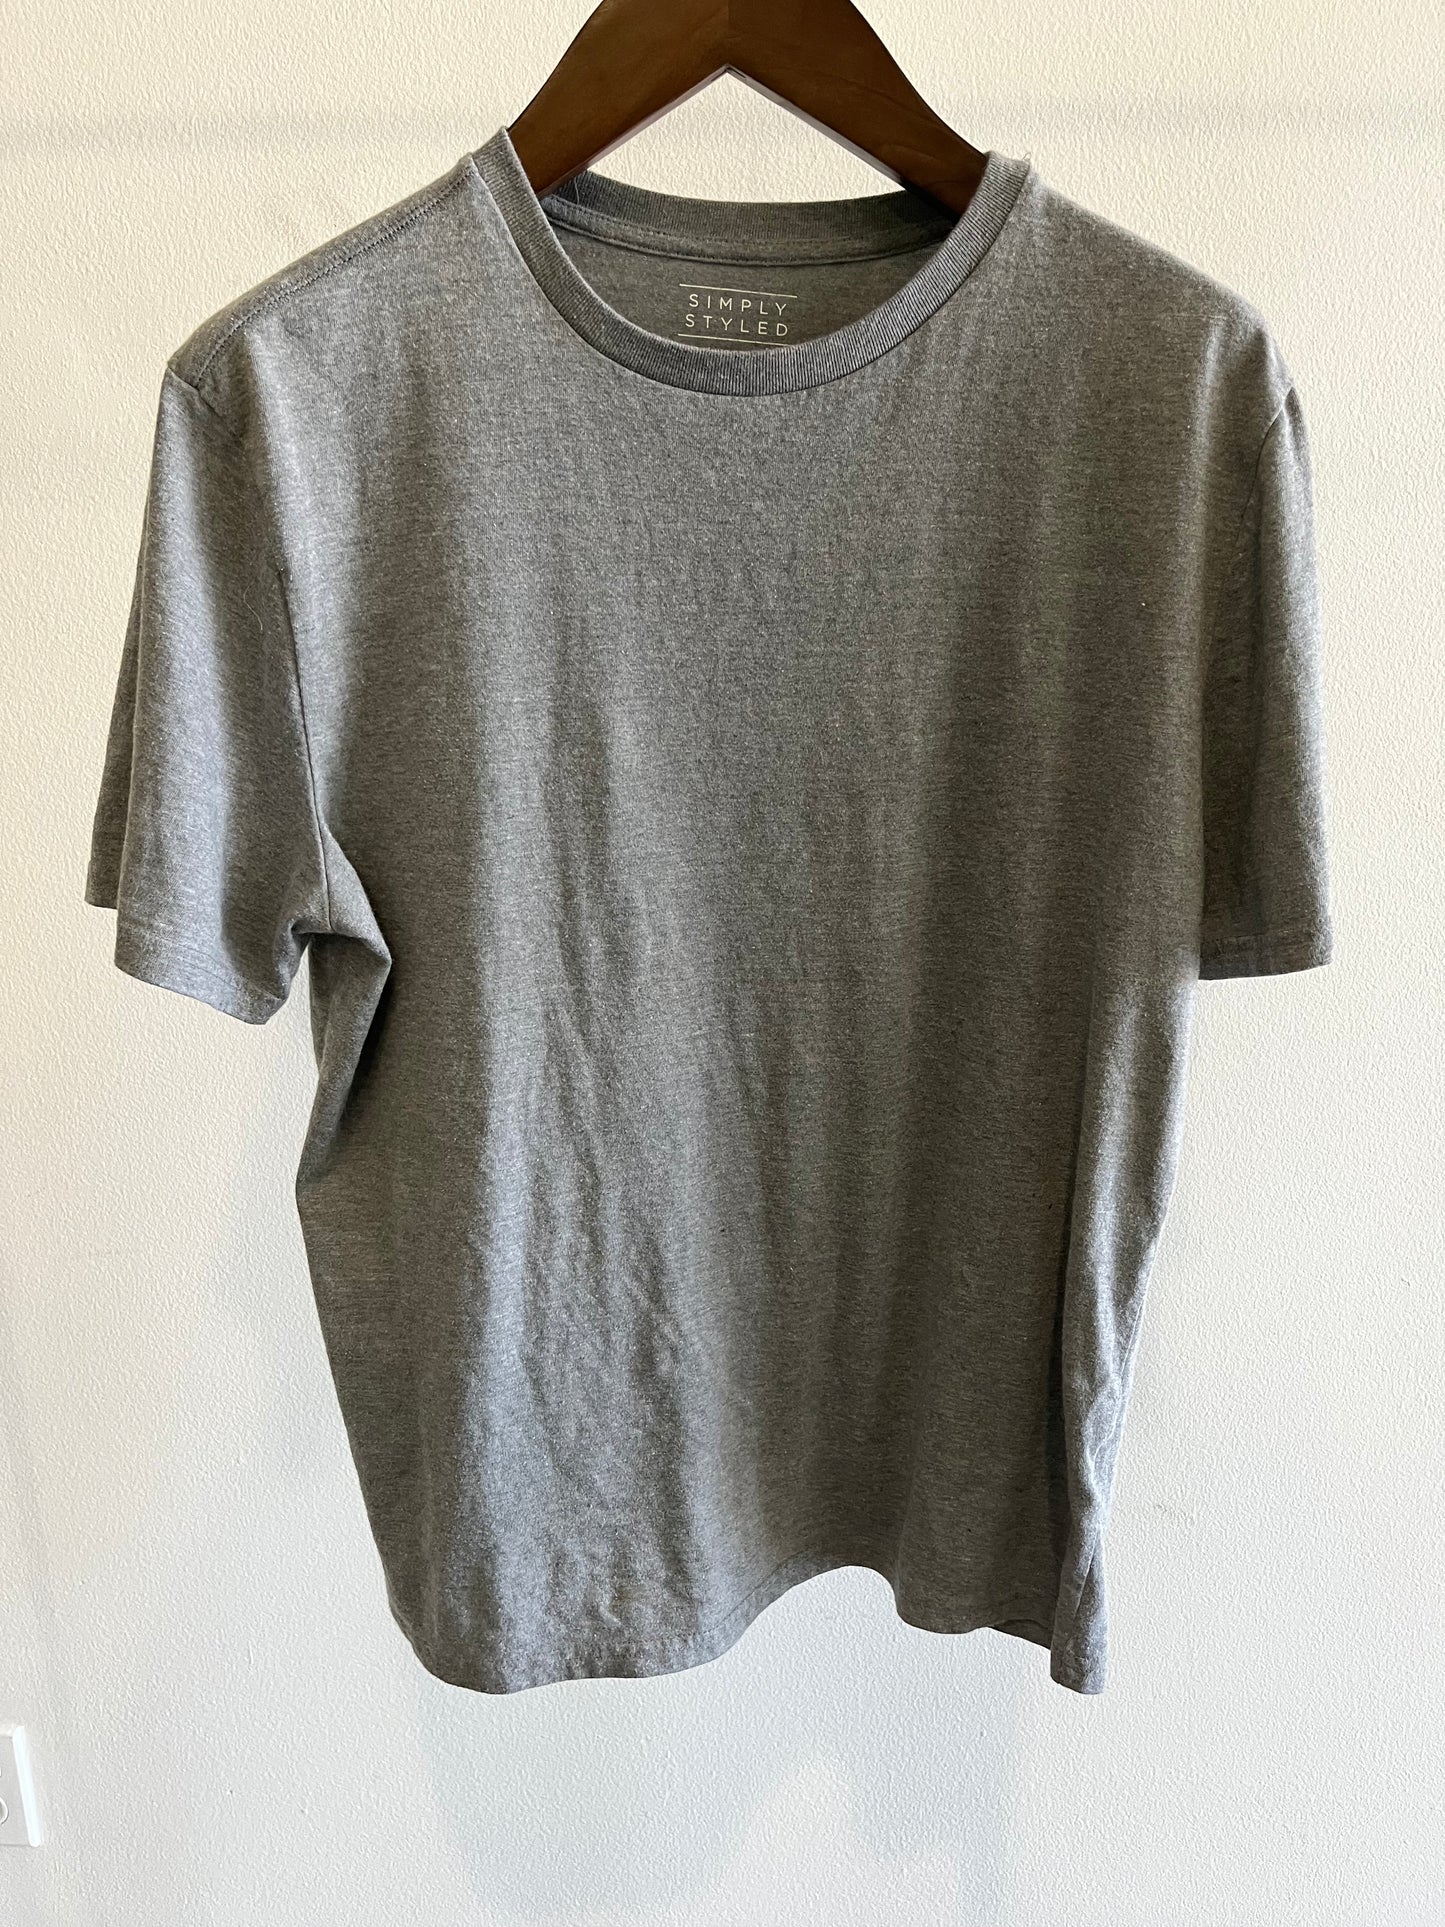 NEW GIRL: Nick's Simply Styled Grey T-shirt (L)